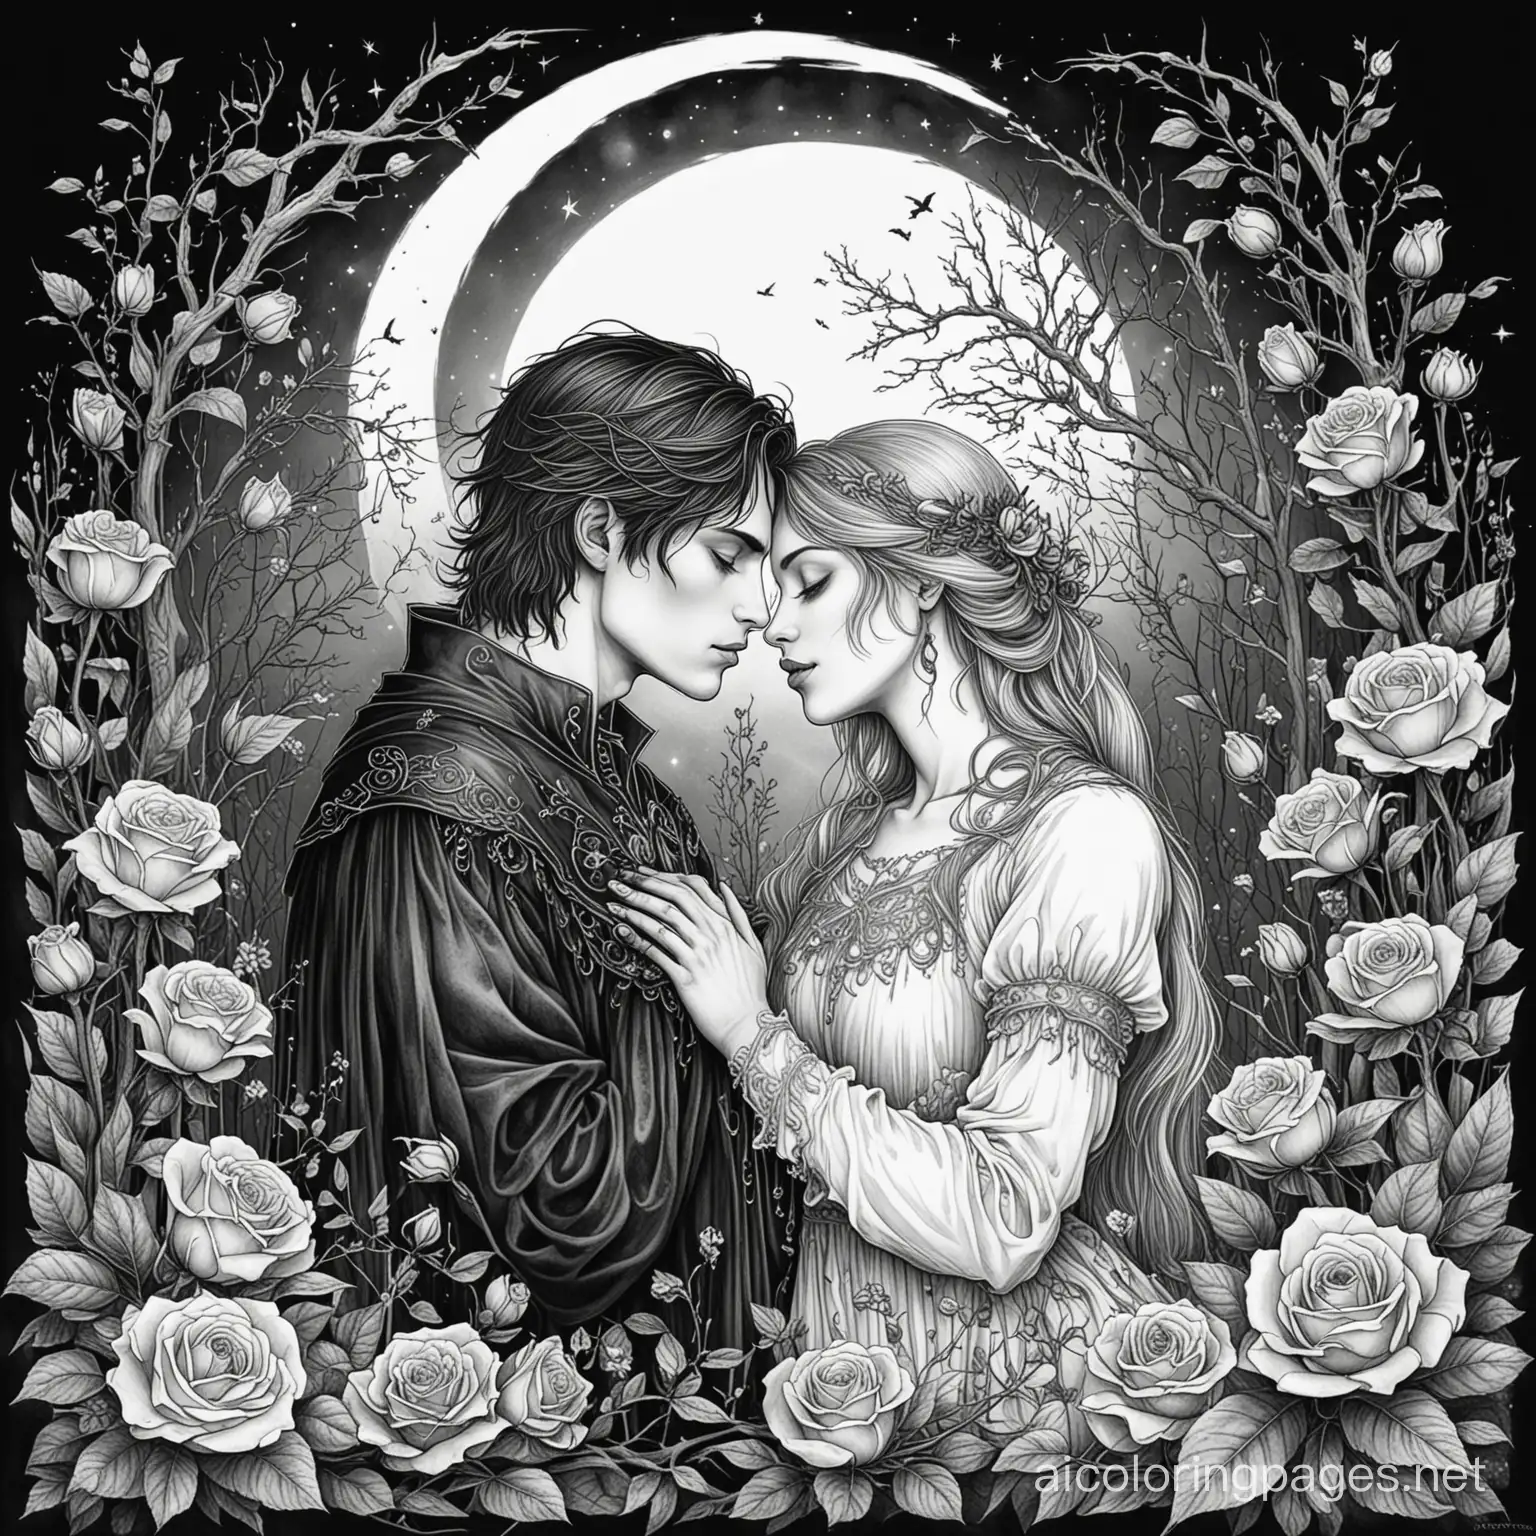 dark romance a gothic couple in a embrace surrounded by roses thorns and moonlight, Coloring Page, black and white, line art, white background, Simplicity, Ample White Space. The background of the coloring page is plain white to make it easy for young children to color within the lines. The outlines of all the subjects are easy to distinguish, making it simple for kids to color without too much difficulty